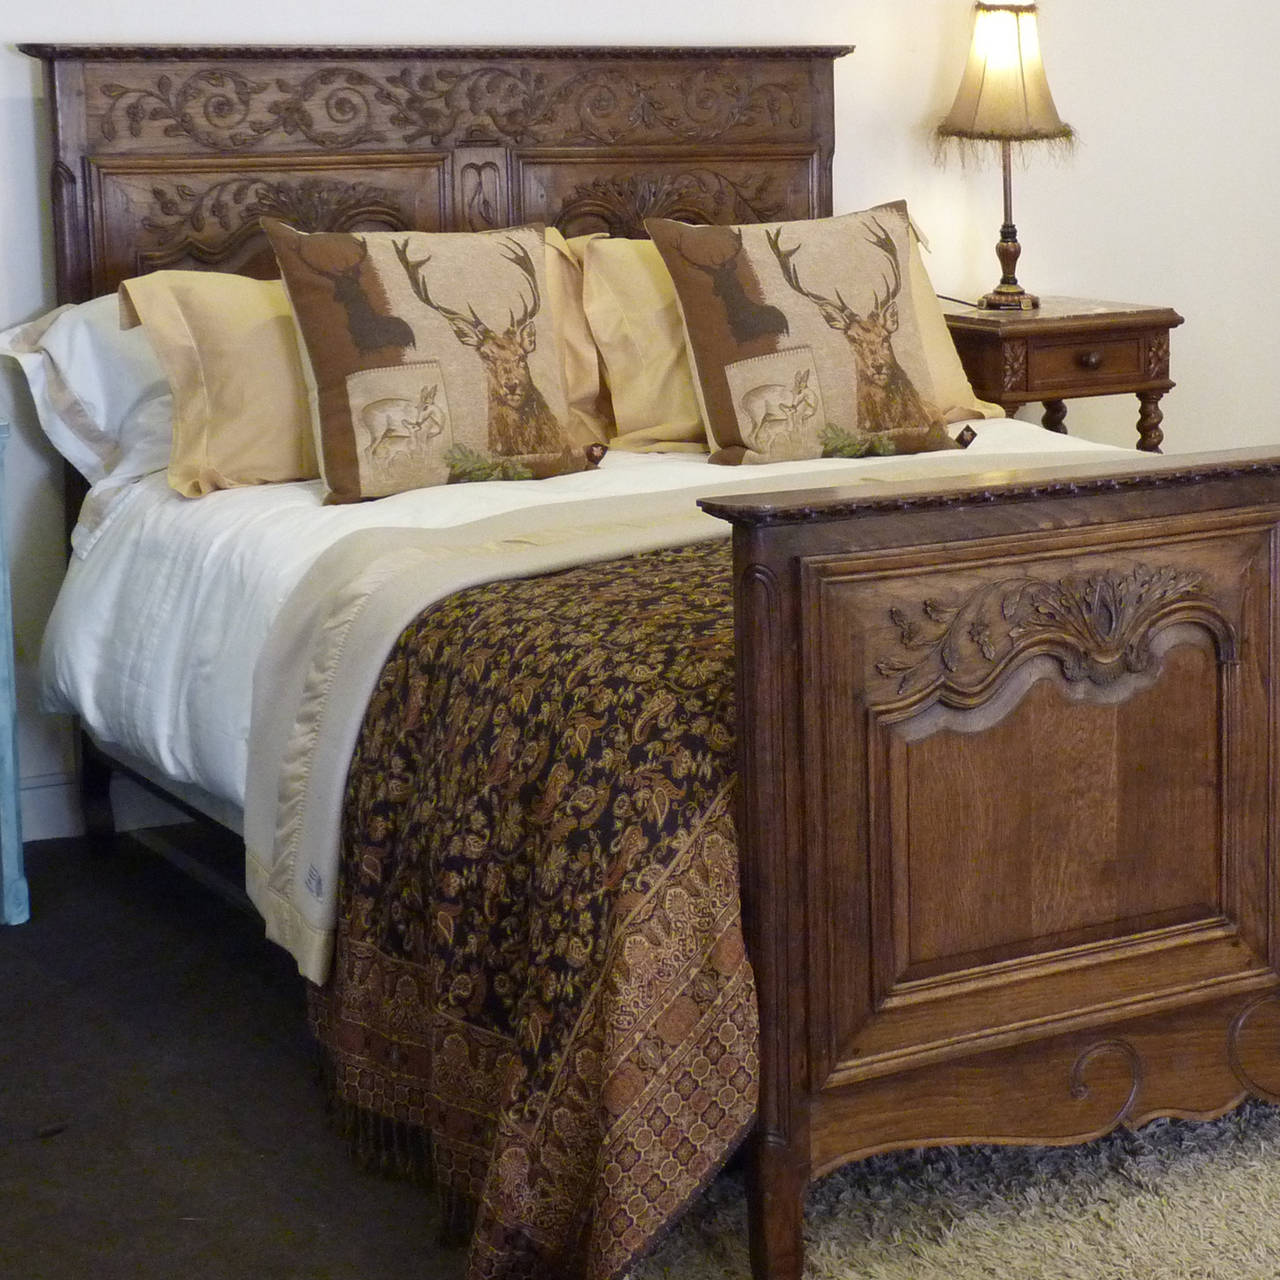 This finely carved oak country piece has a real rustic charm, especially with the two love birds in the centre of the head panel.

The bed accepts a 5 ft wide (60 in or 150 cm) mattress, which is British King Size or American Queen Size.

We